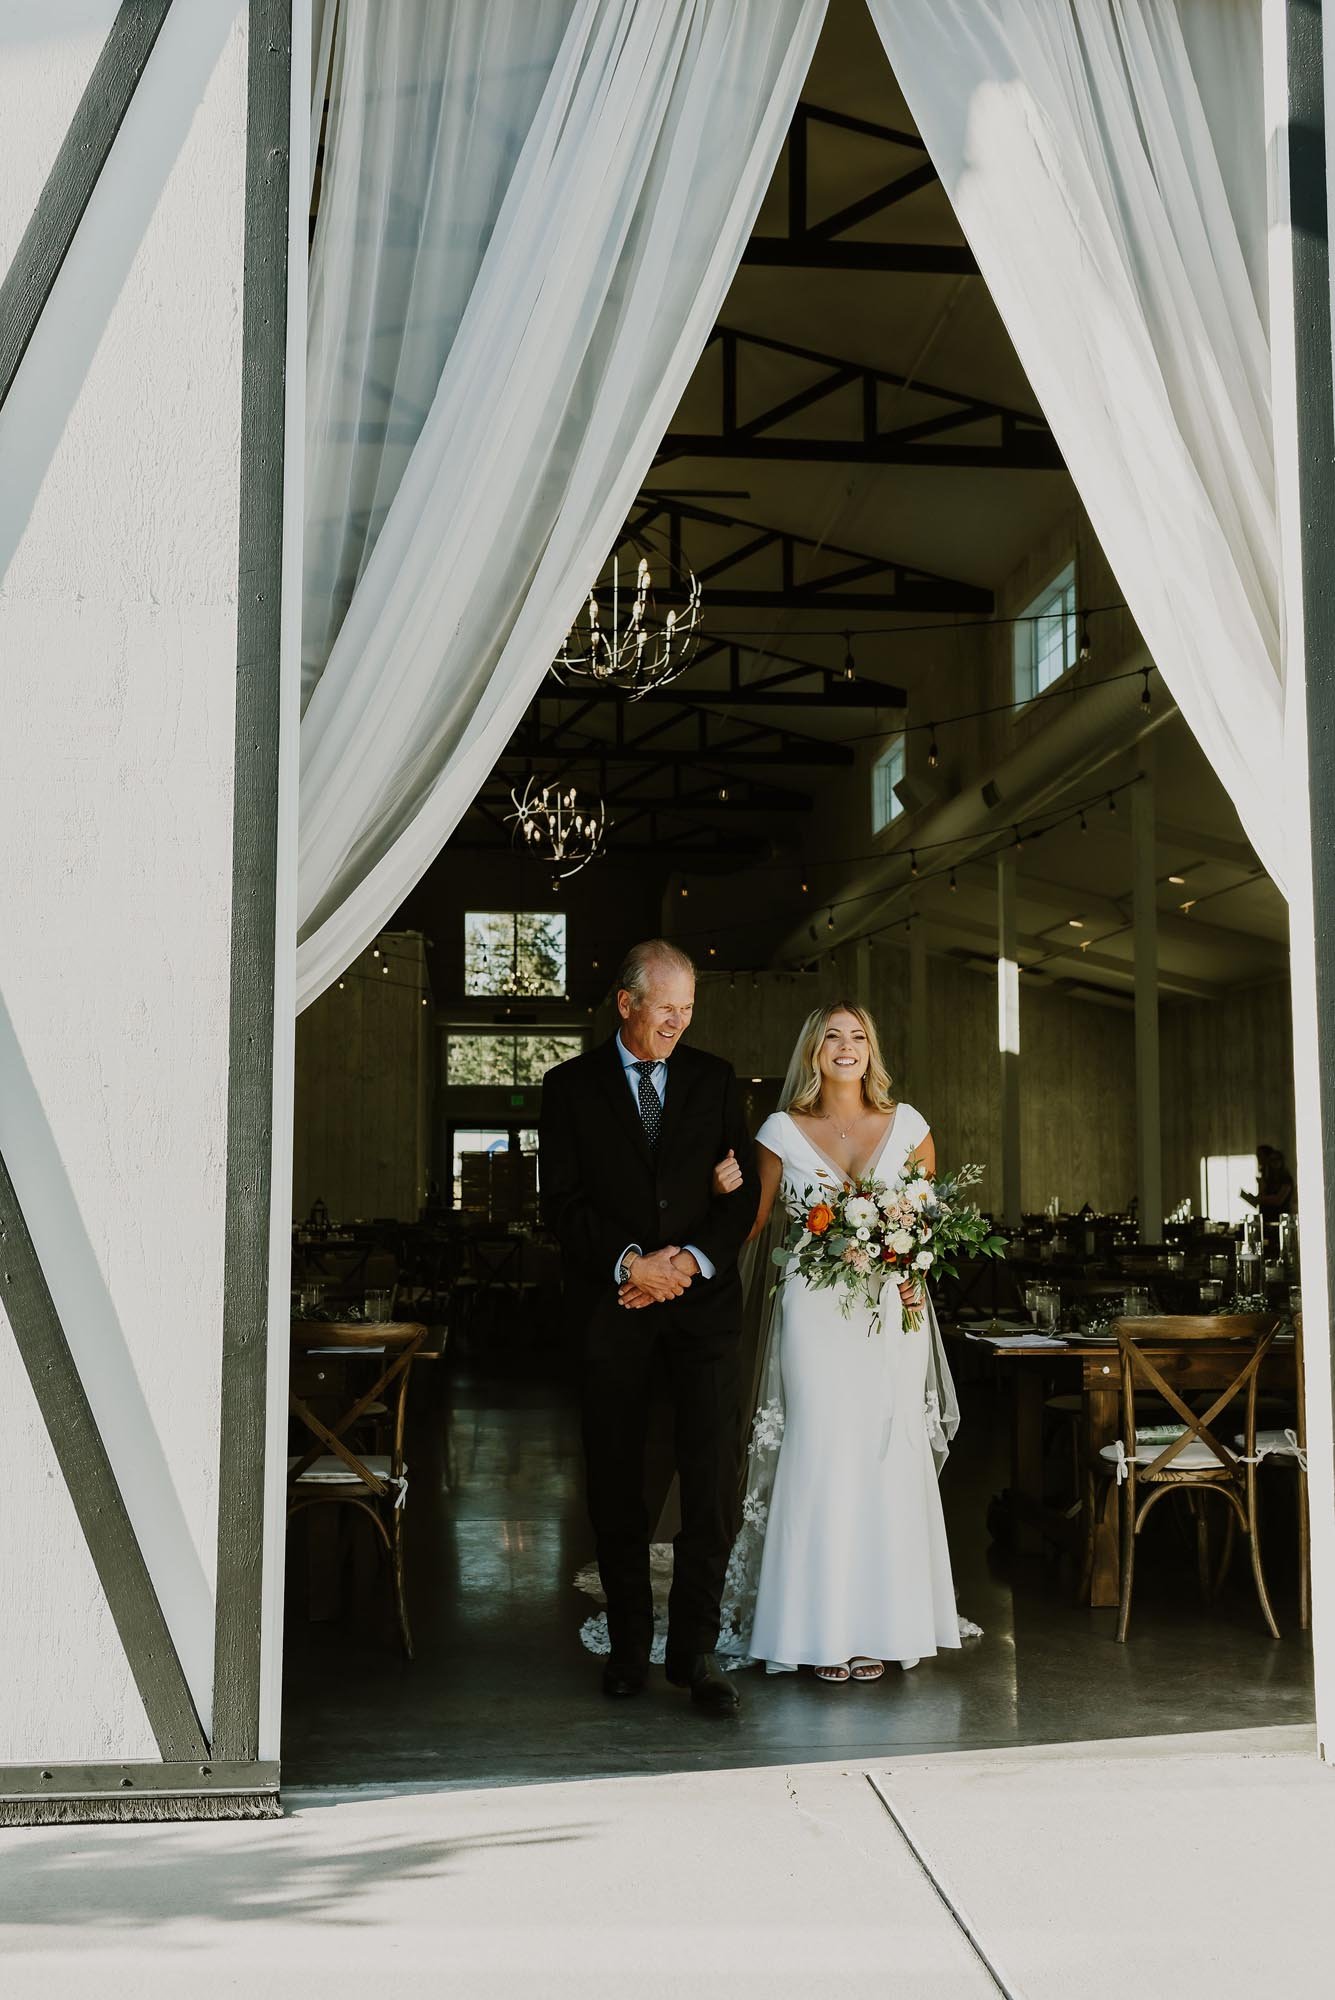  A bride smiling getting ready to walk down the aisle with her father. They are standing in the doorway of a lovely barn wedding venue and the bride is holding a colorful floral bouquet 